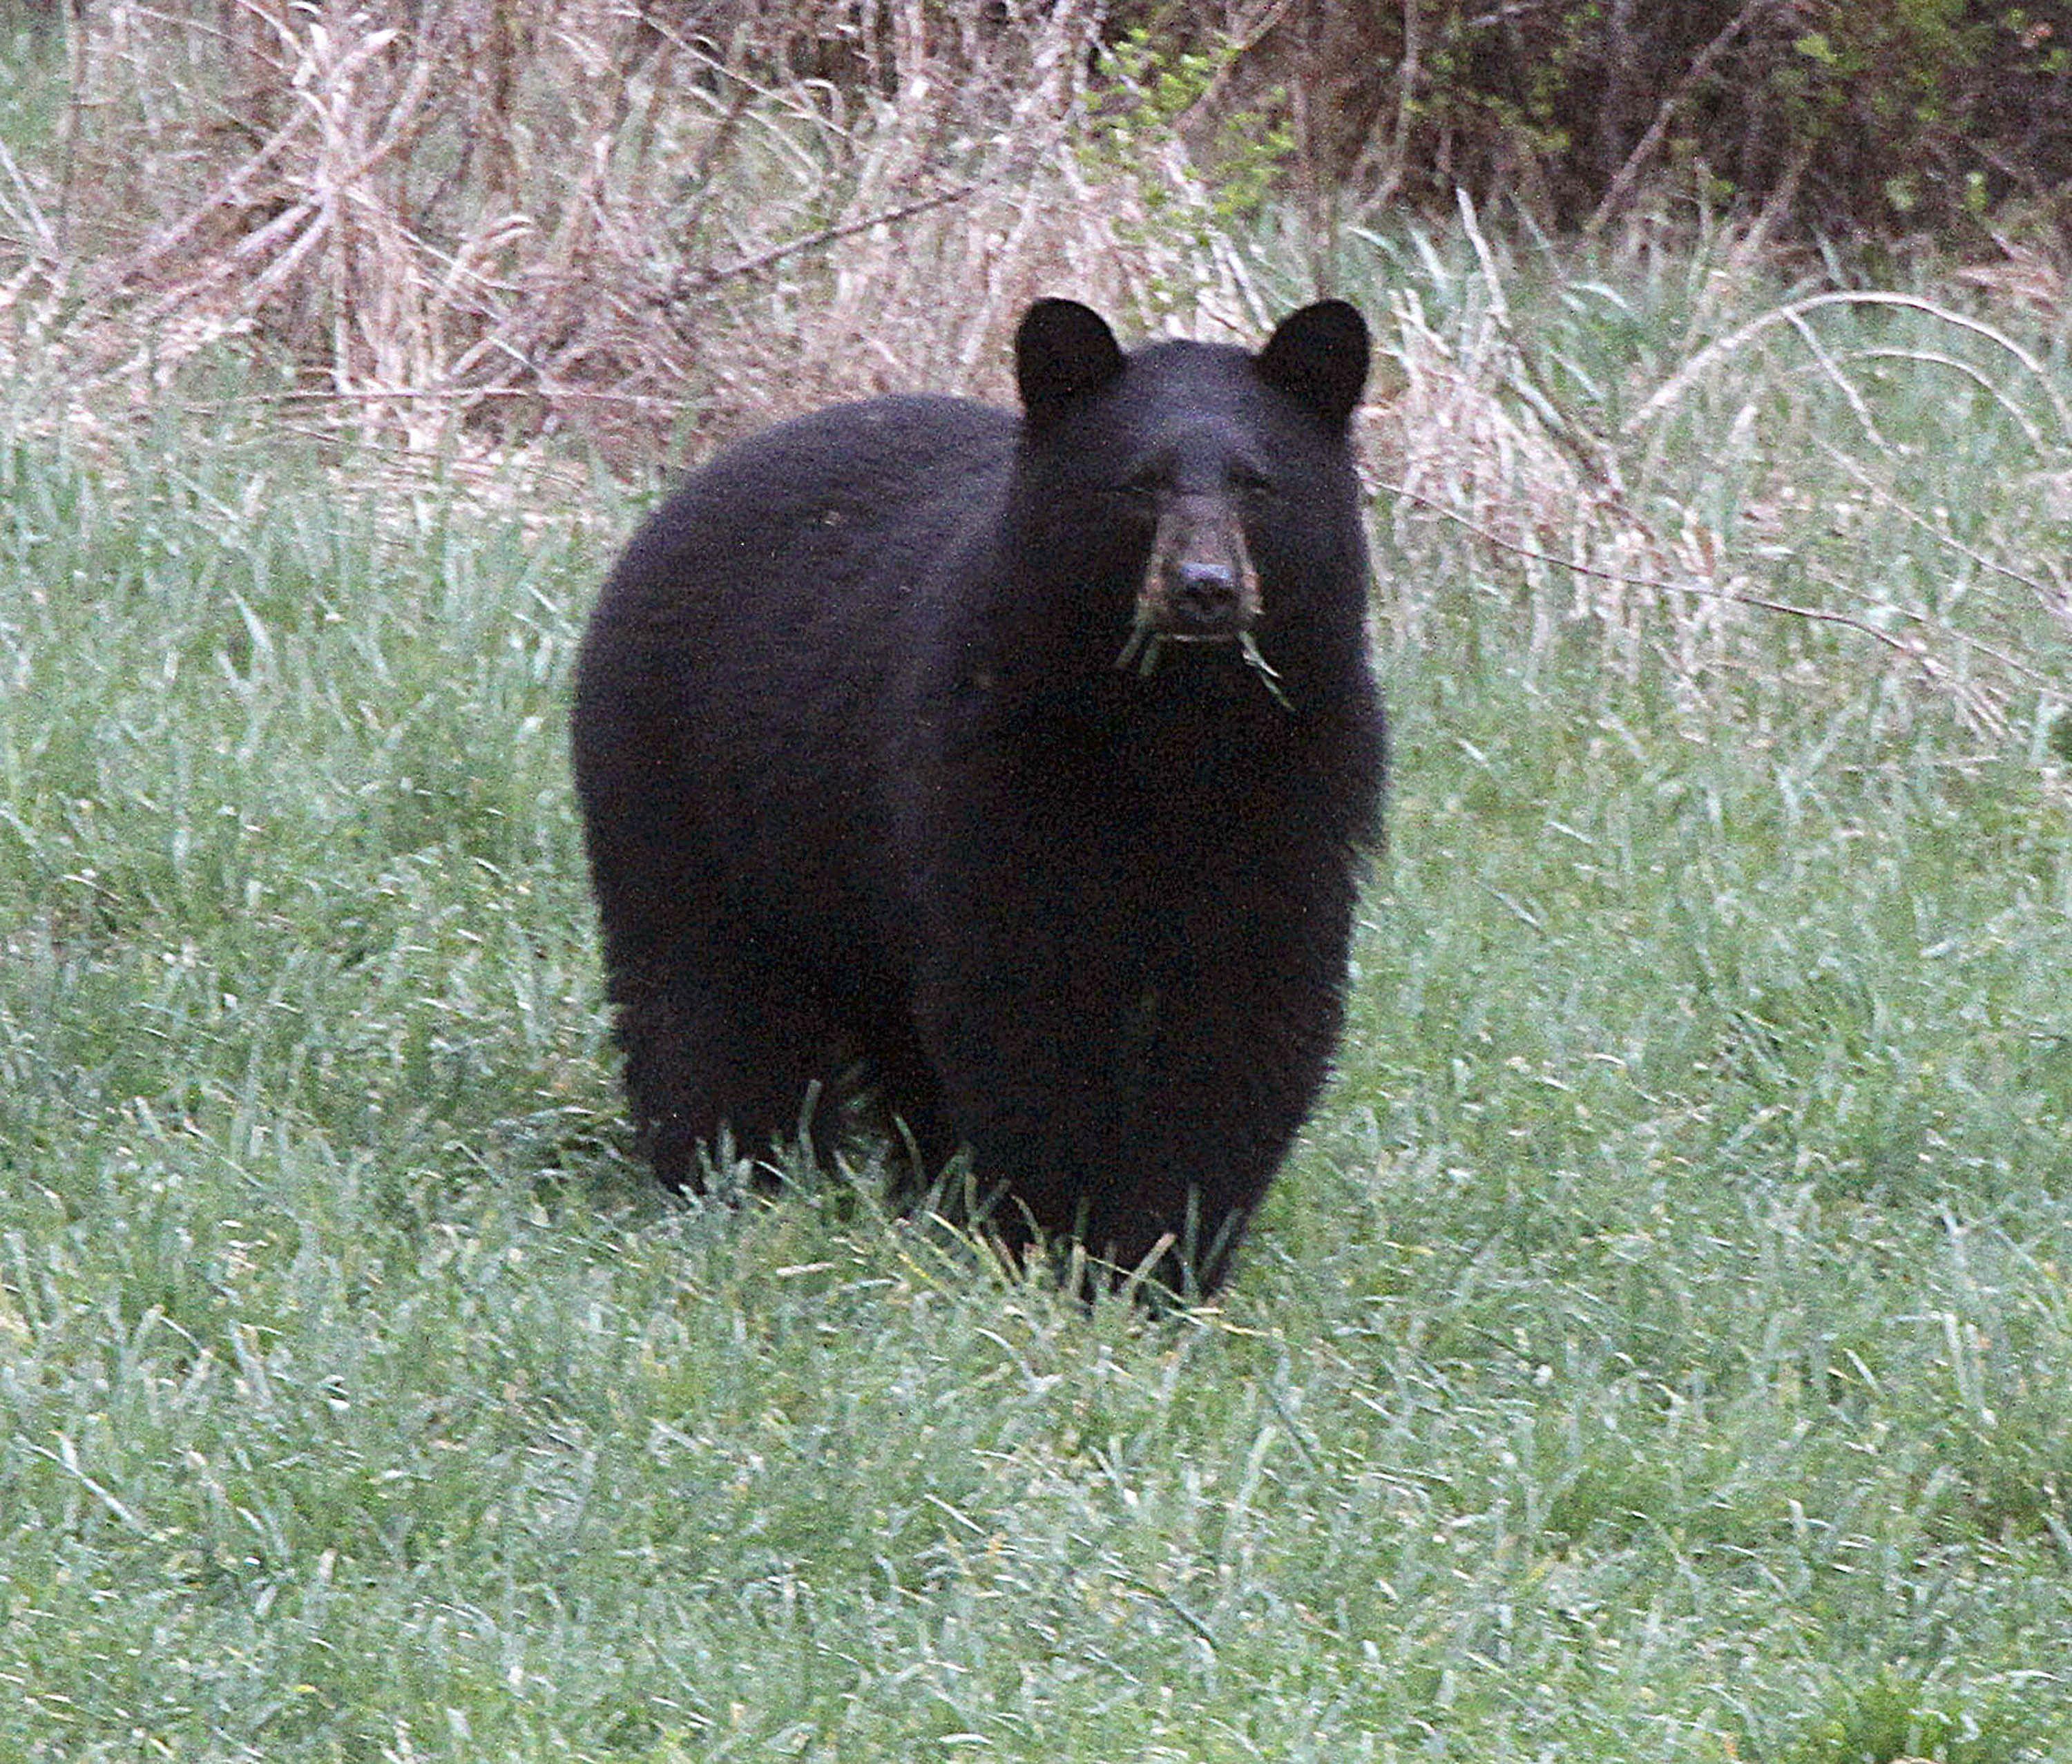 Red and Black Bear Logo - Colorado Parks and Wildlife seach for bear after attack in Red